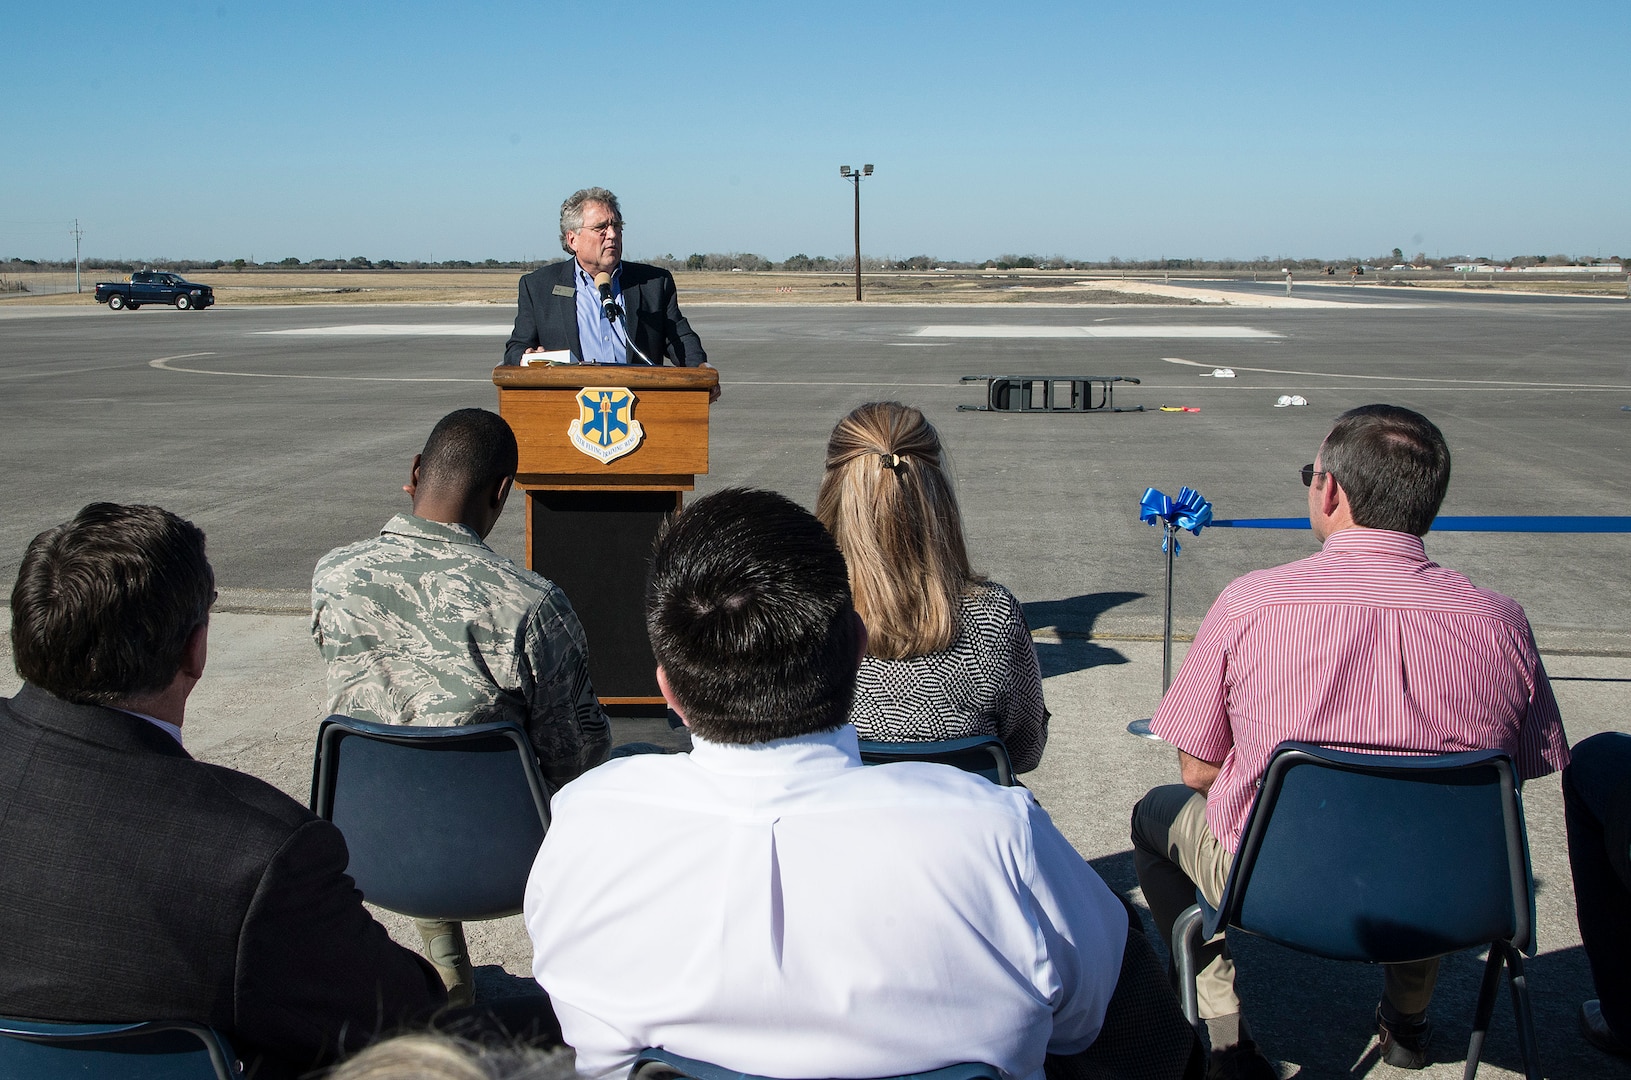 City of Seguin Mayor Don Keil, addresses the crowd during a symbolic ribbon cutting event at Joint Base San Antonio-Randolph Seguin Auxiliary Airfield Jan. 20. The event signified the reopening of the airfield following a $12.4 million repaving and construction project that included replacing and grading the entire airfield, stabilizing existing soils, and constructing a new taxiway, parking apron and emergency access road.  (U.S. Air Force photo by Johnny Saldivar)